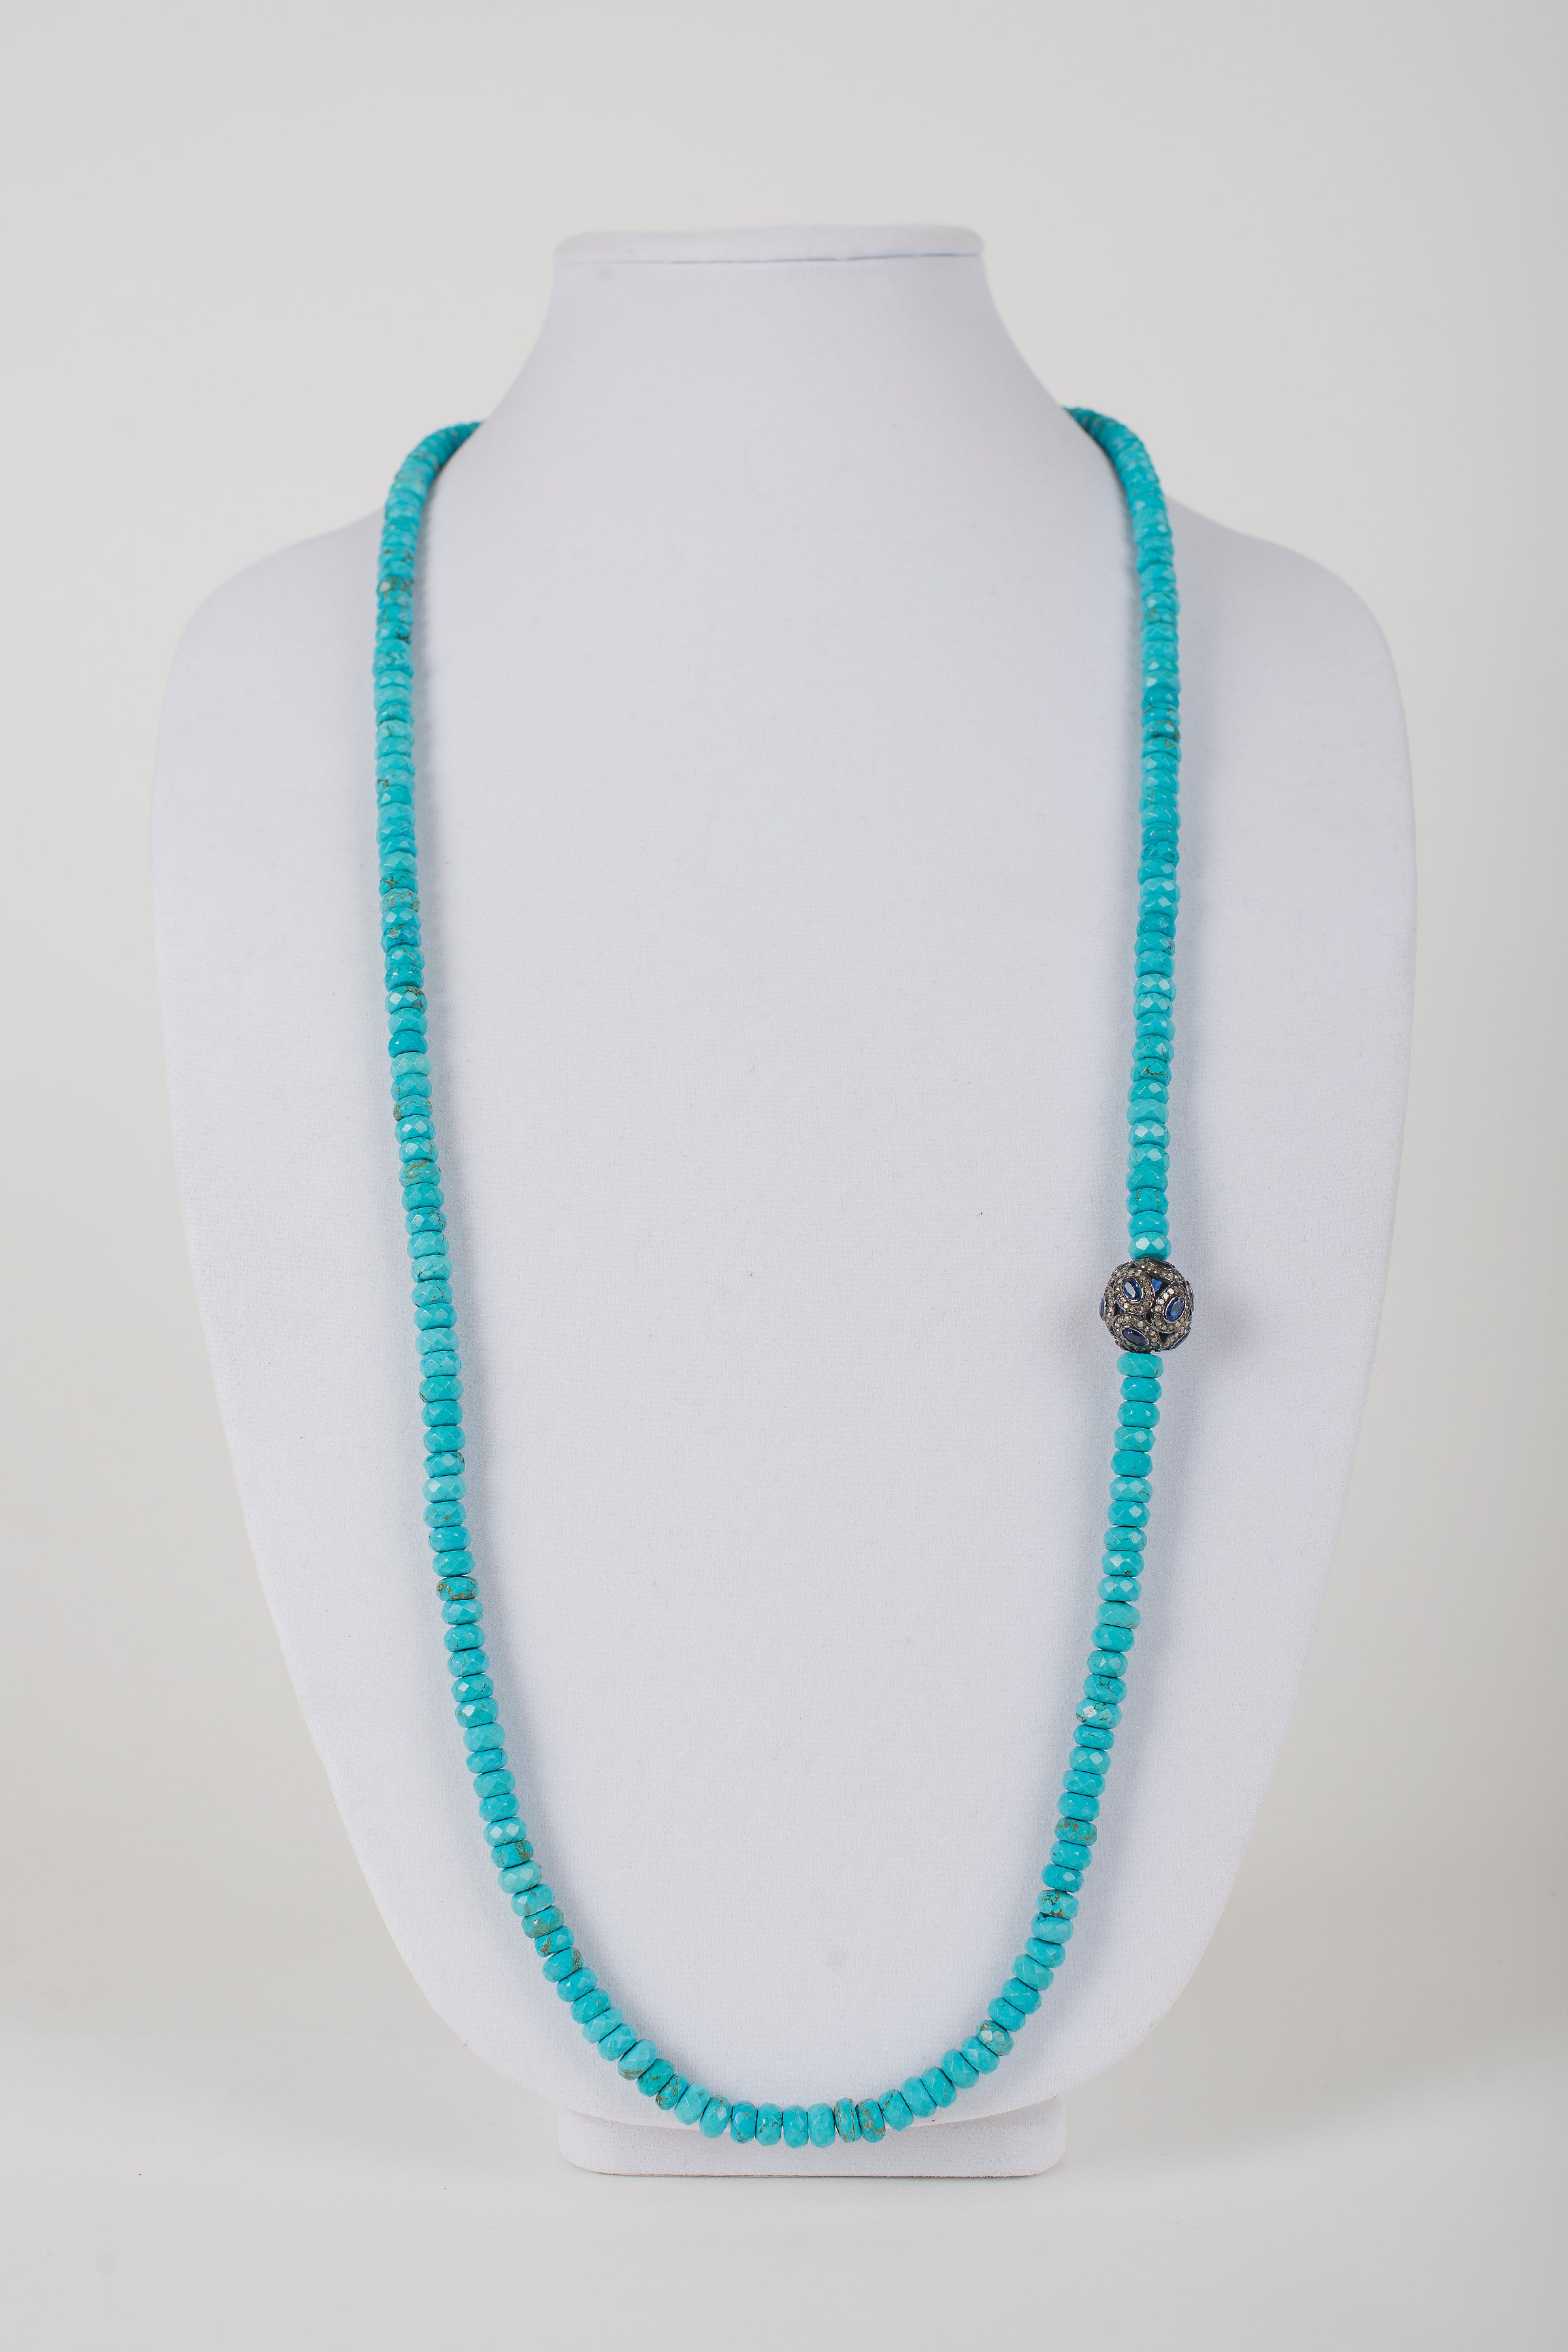 Faceted Turquoise with Pave Diamond and Sapphire Bead